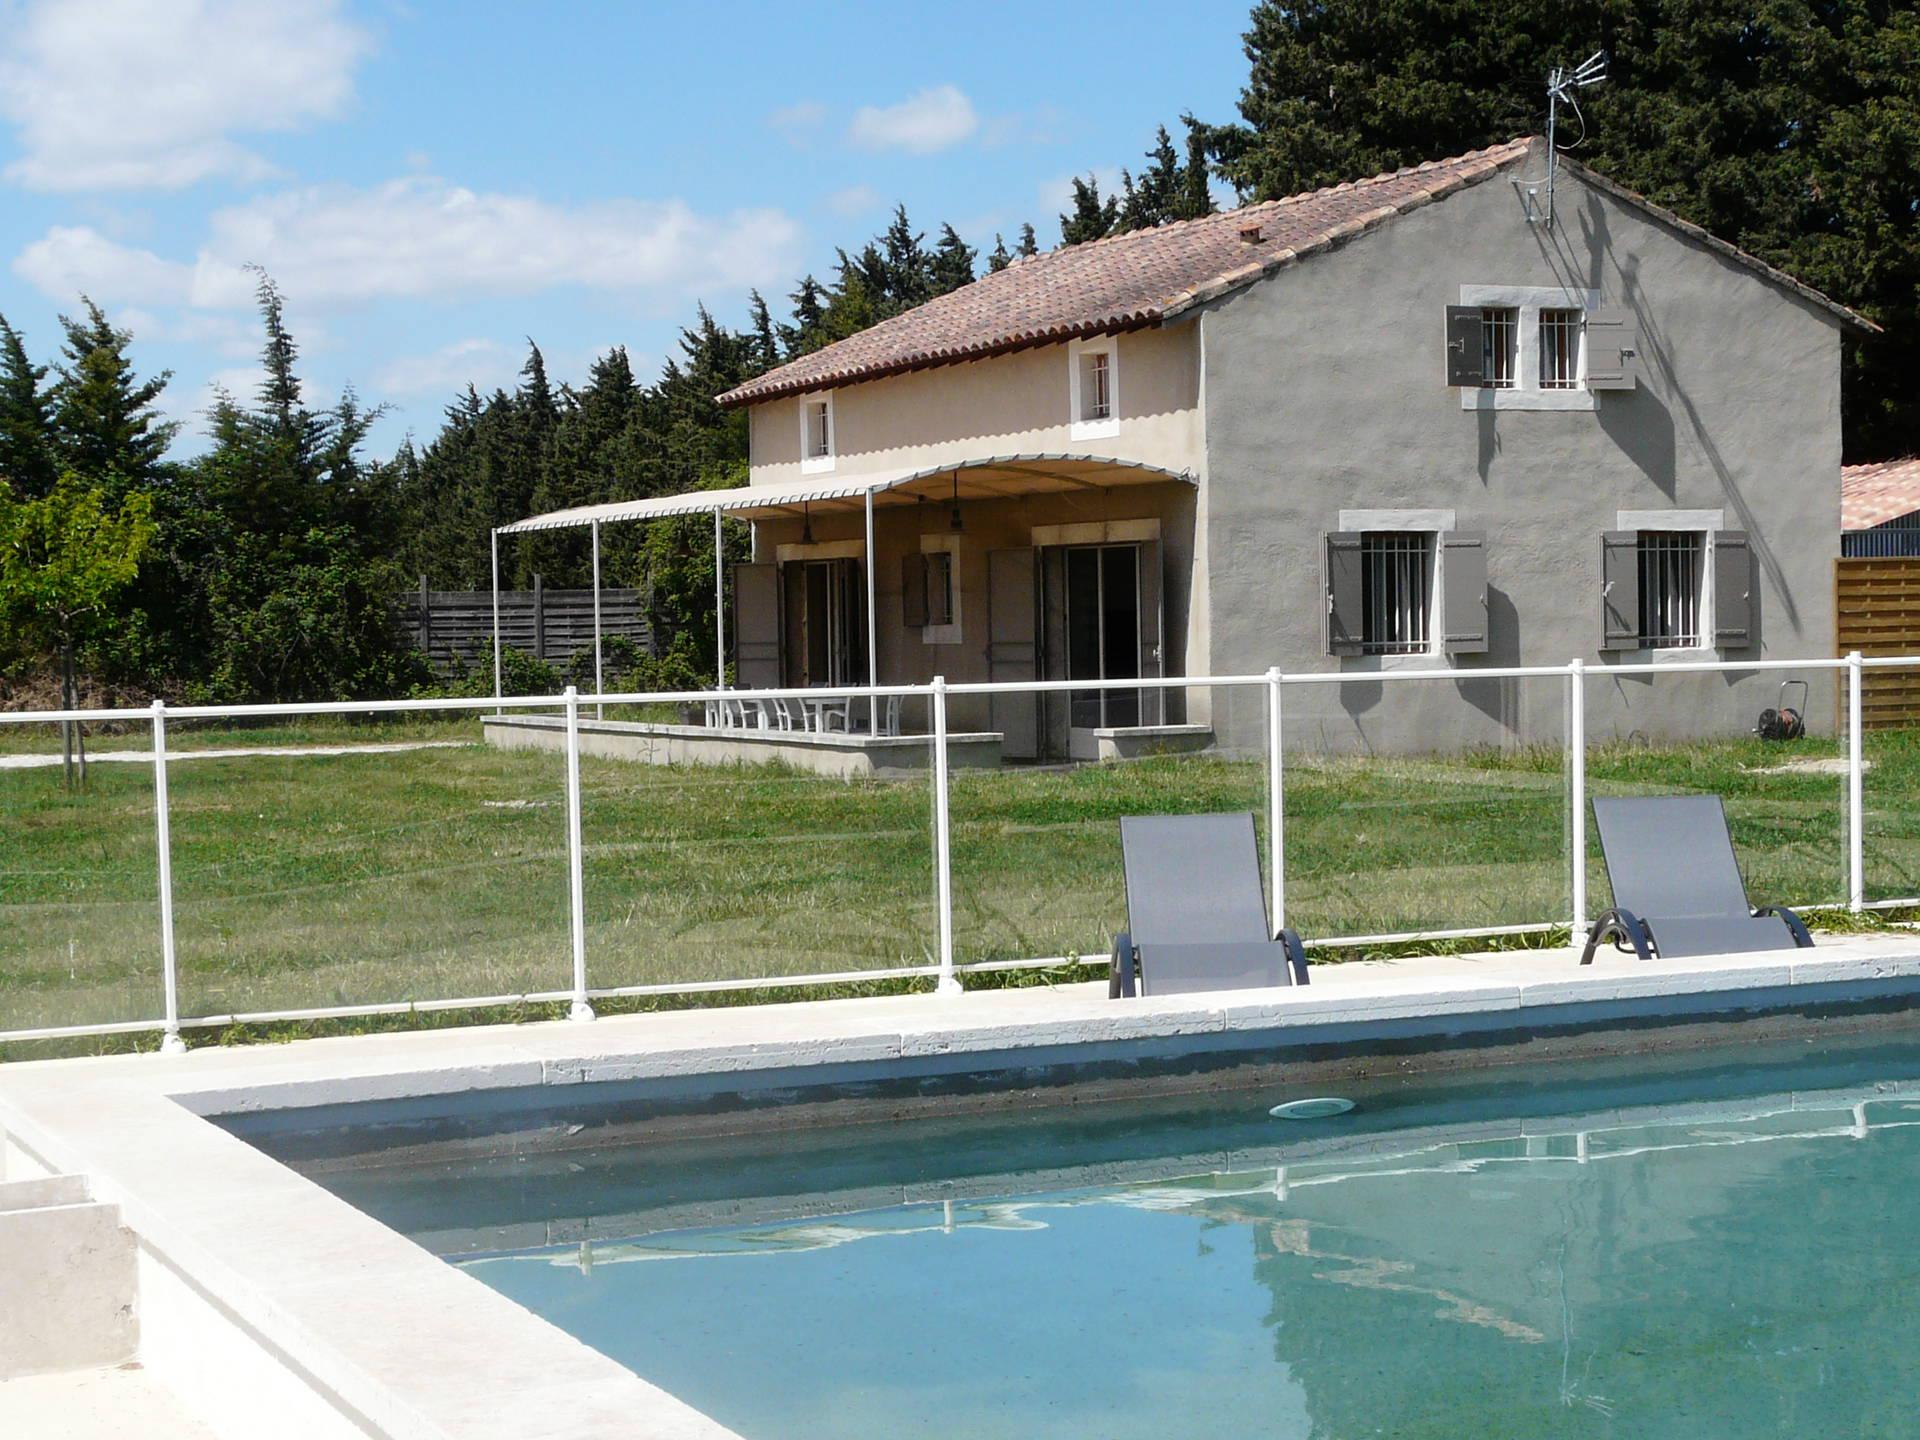 Property Image 1 - Air-conditioned family house with fenced pool in Fontvieille in the Alpilles, sleeps 8